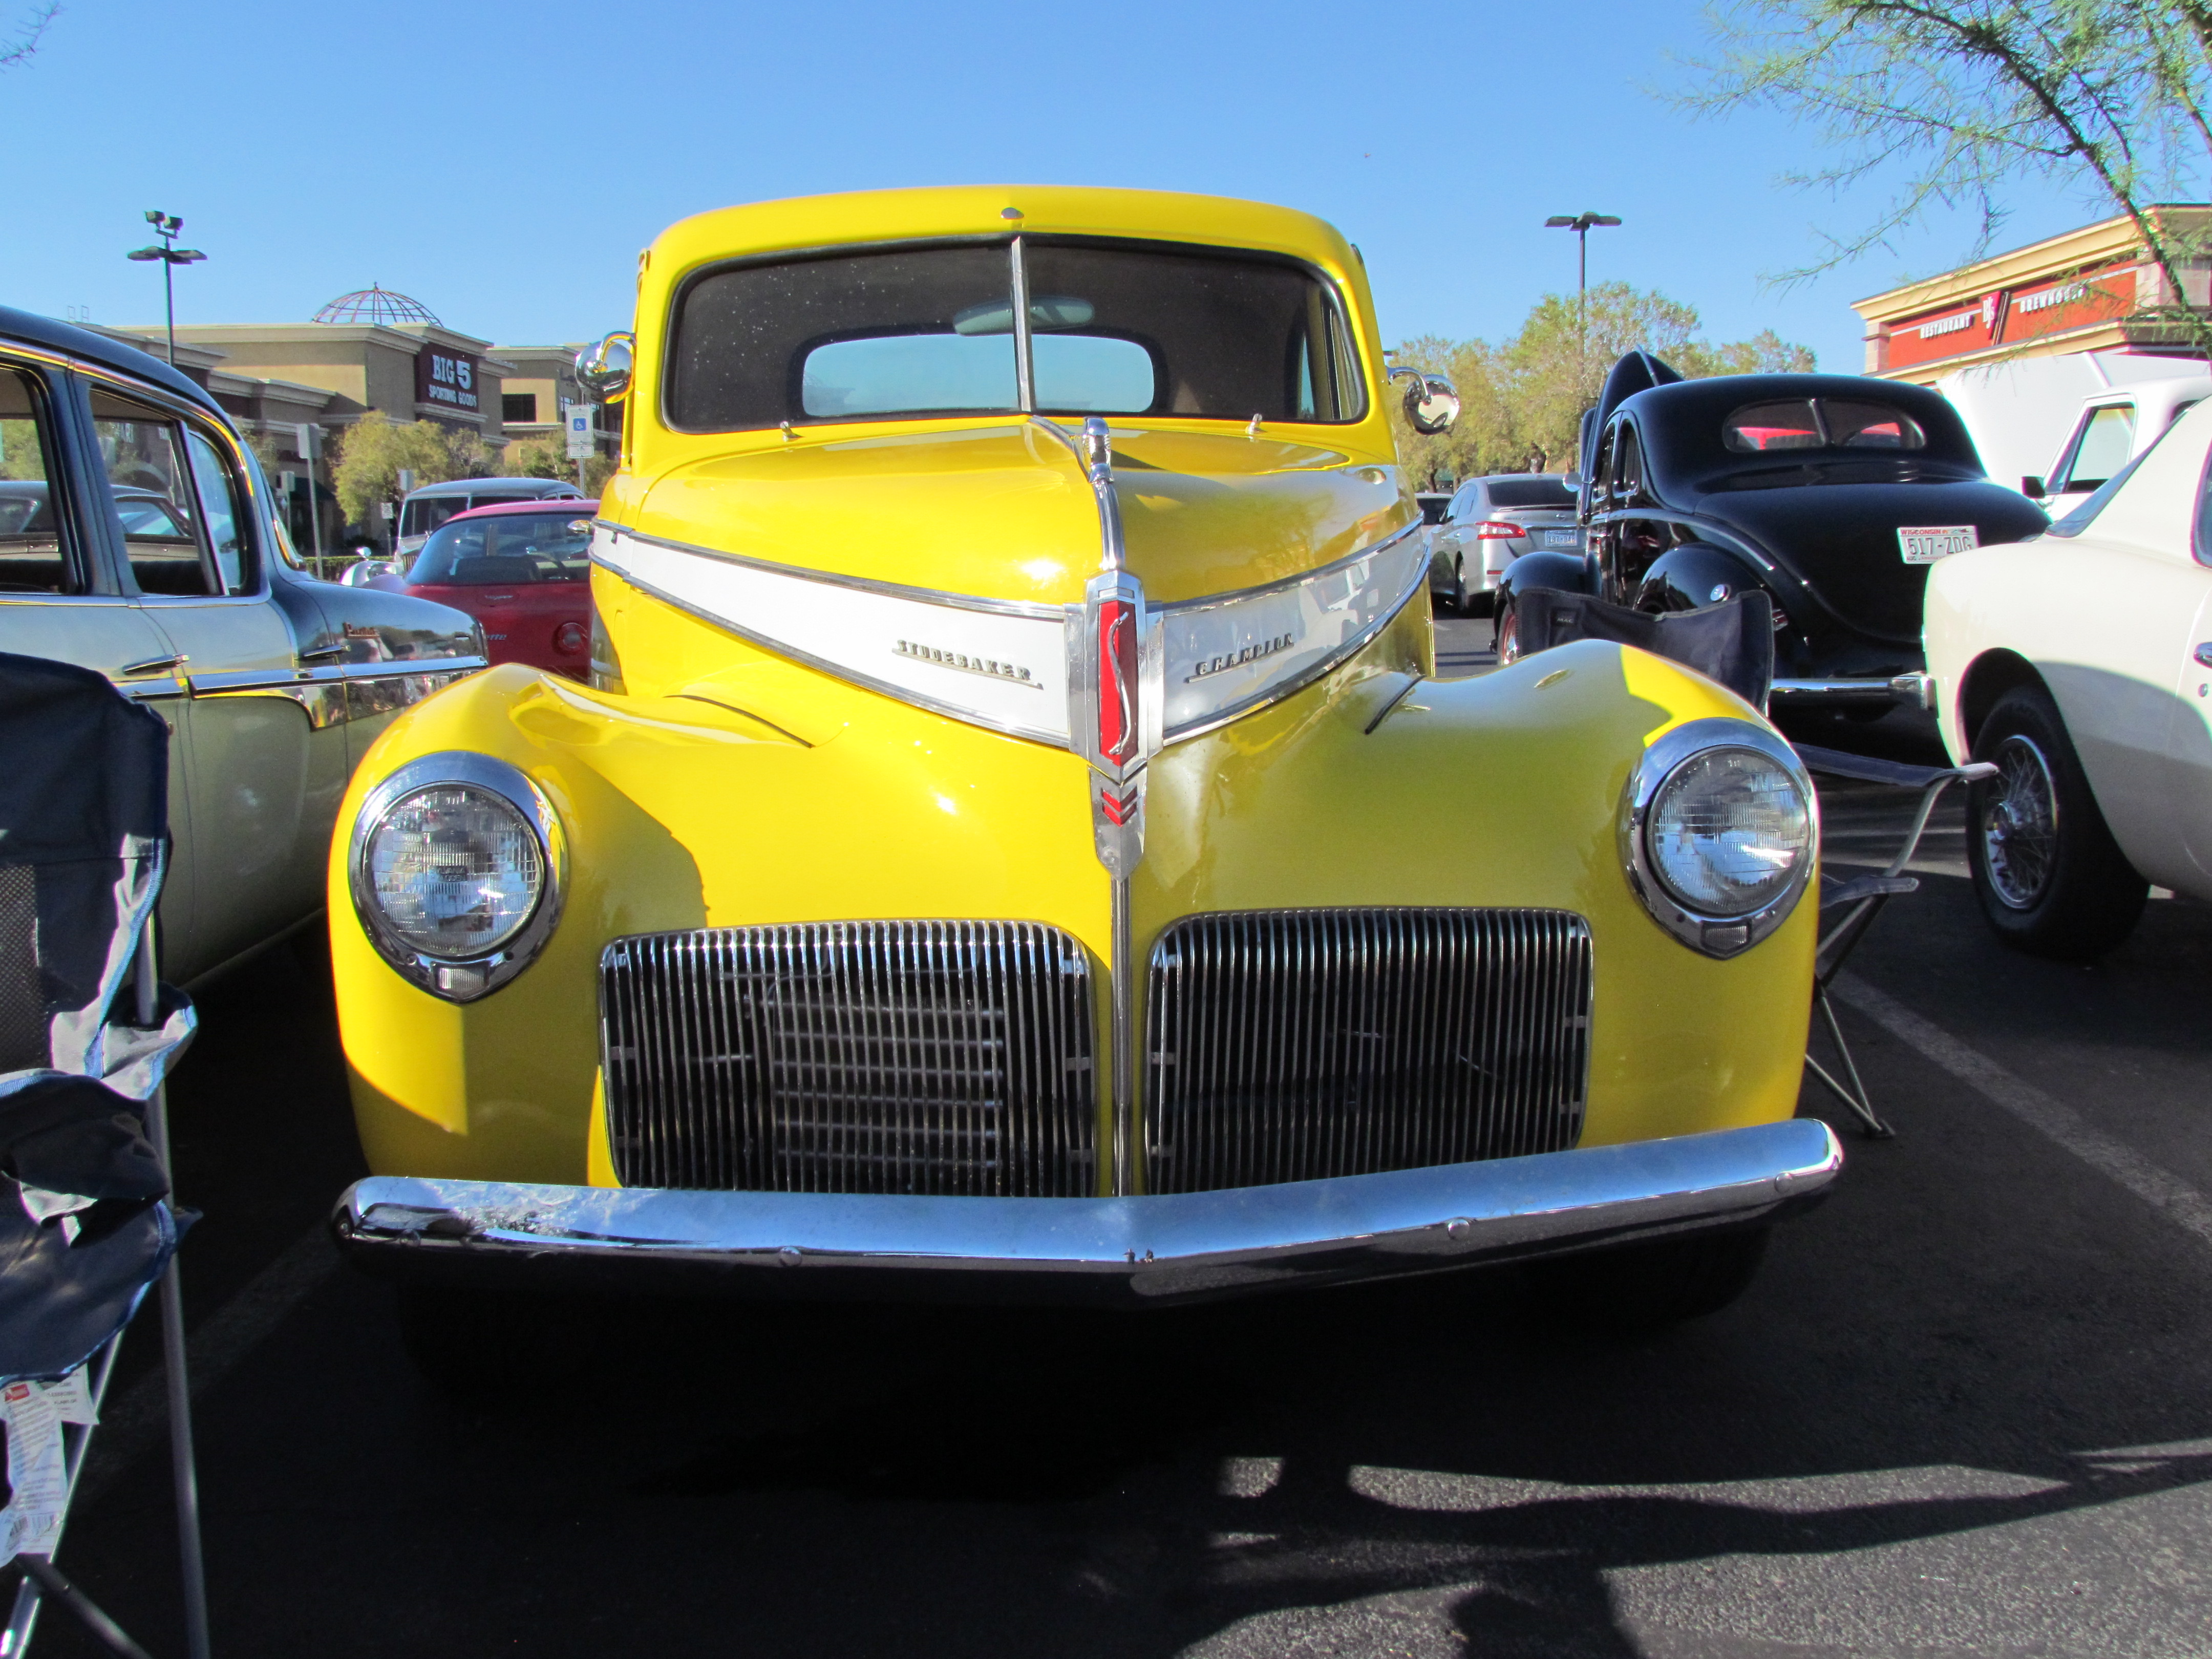 Las Vegas, Off The Strip: The Car Show on Eastern, ClassicCars.com Journal